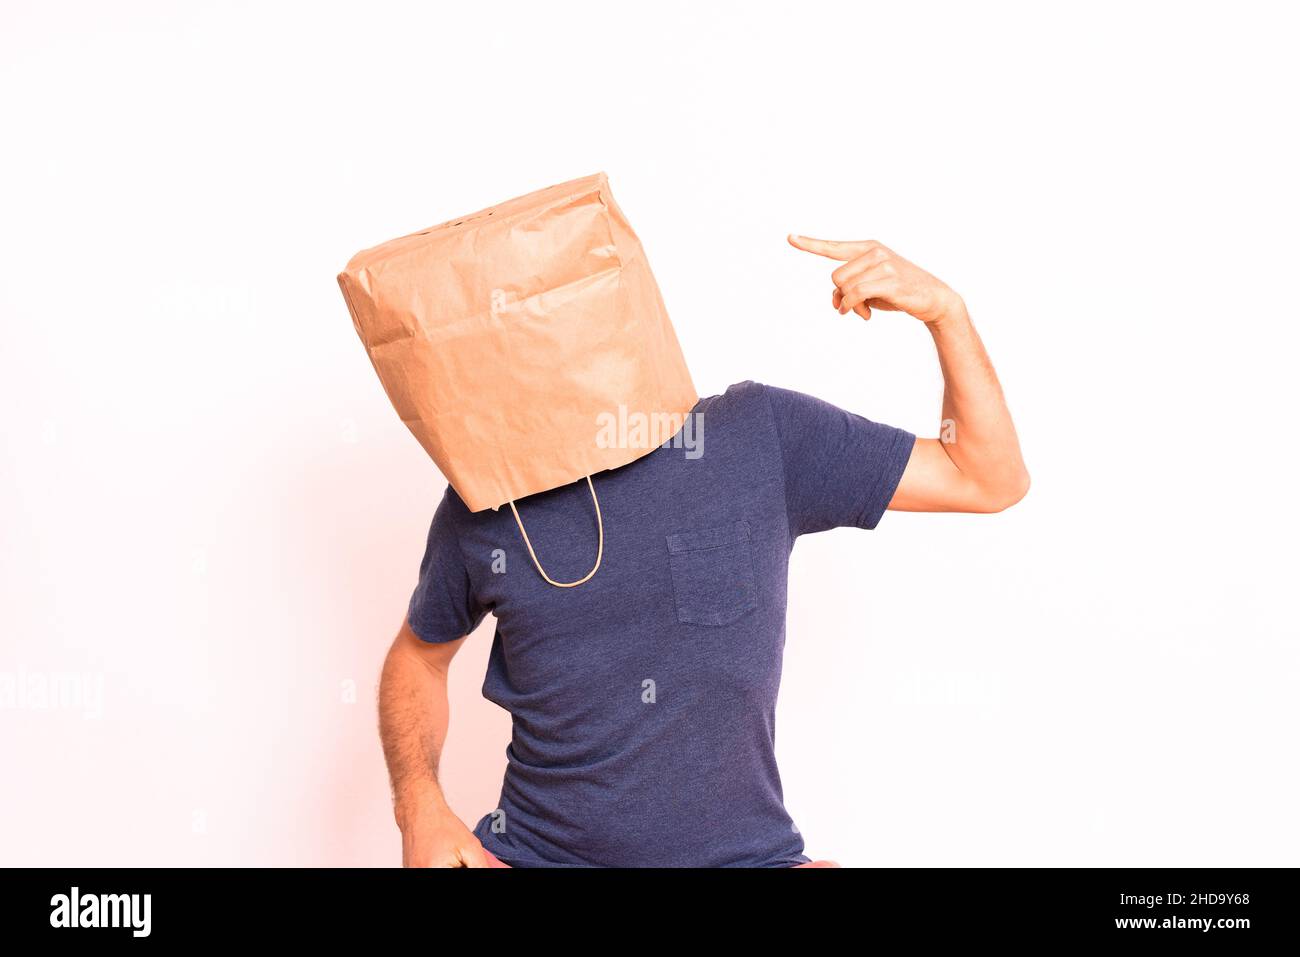 Premium Photo  Kraft paper bag is on the man's head. holes for eyes. funny  idea. guy is angry.